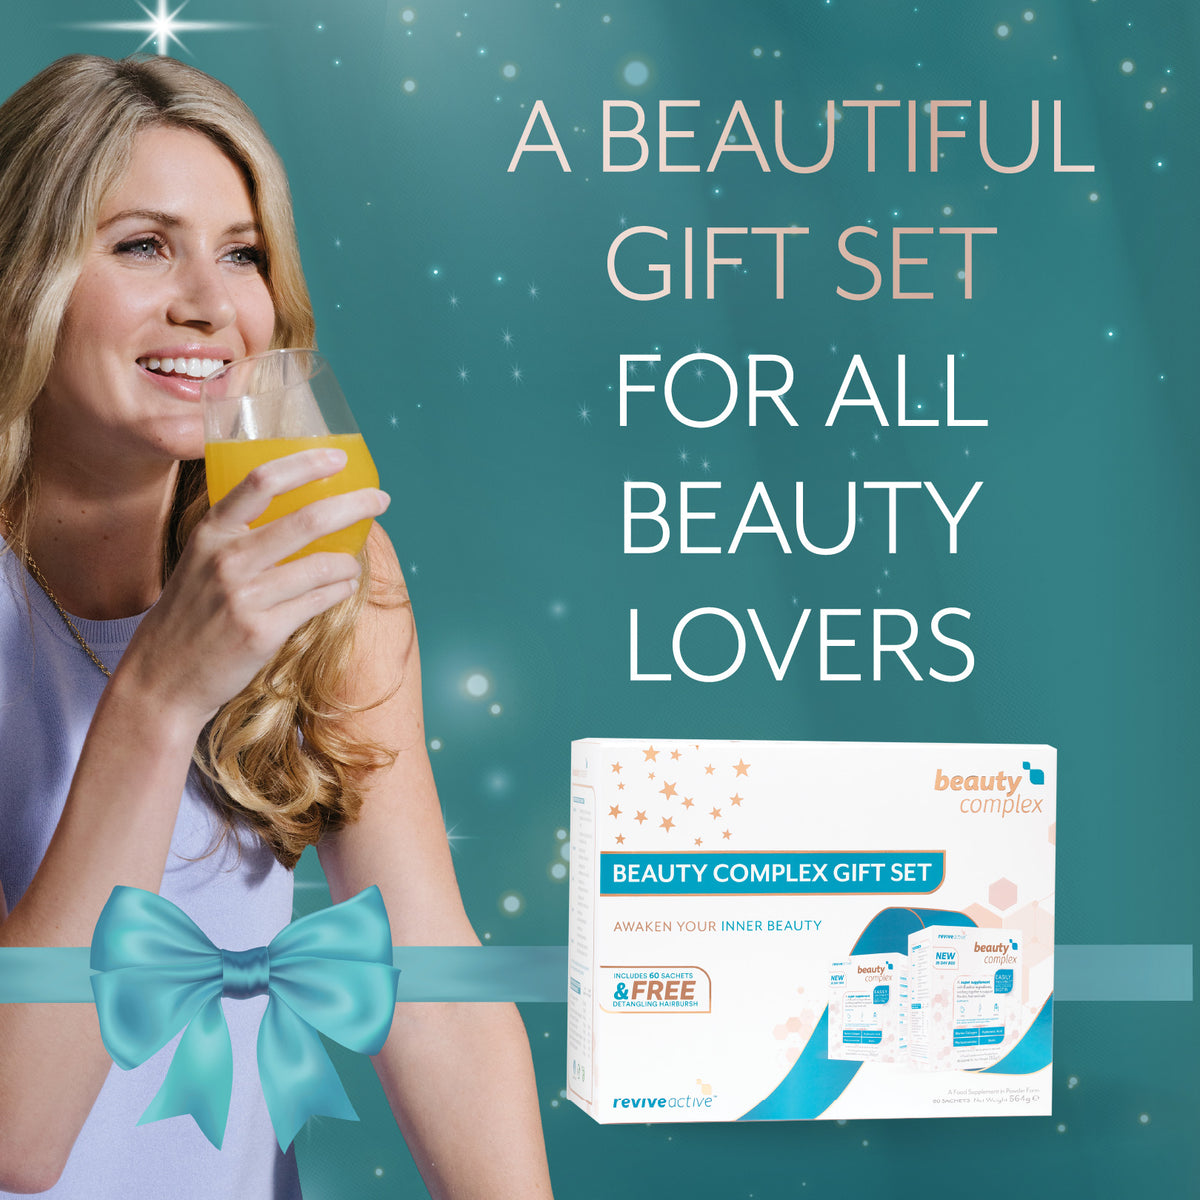 Revive Beauty Complex Gift Set - MicroBio Health